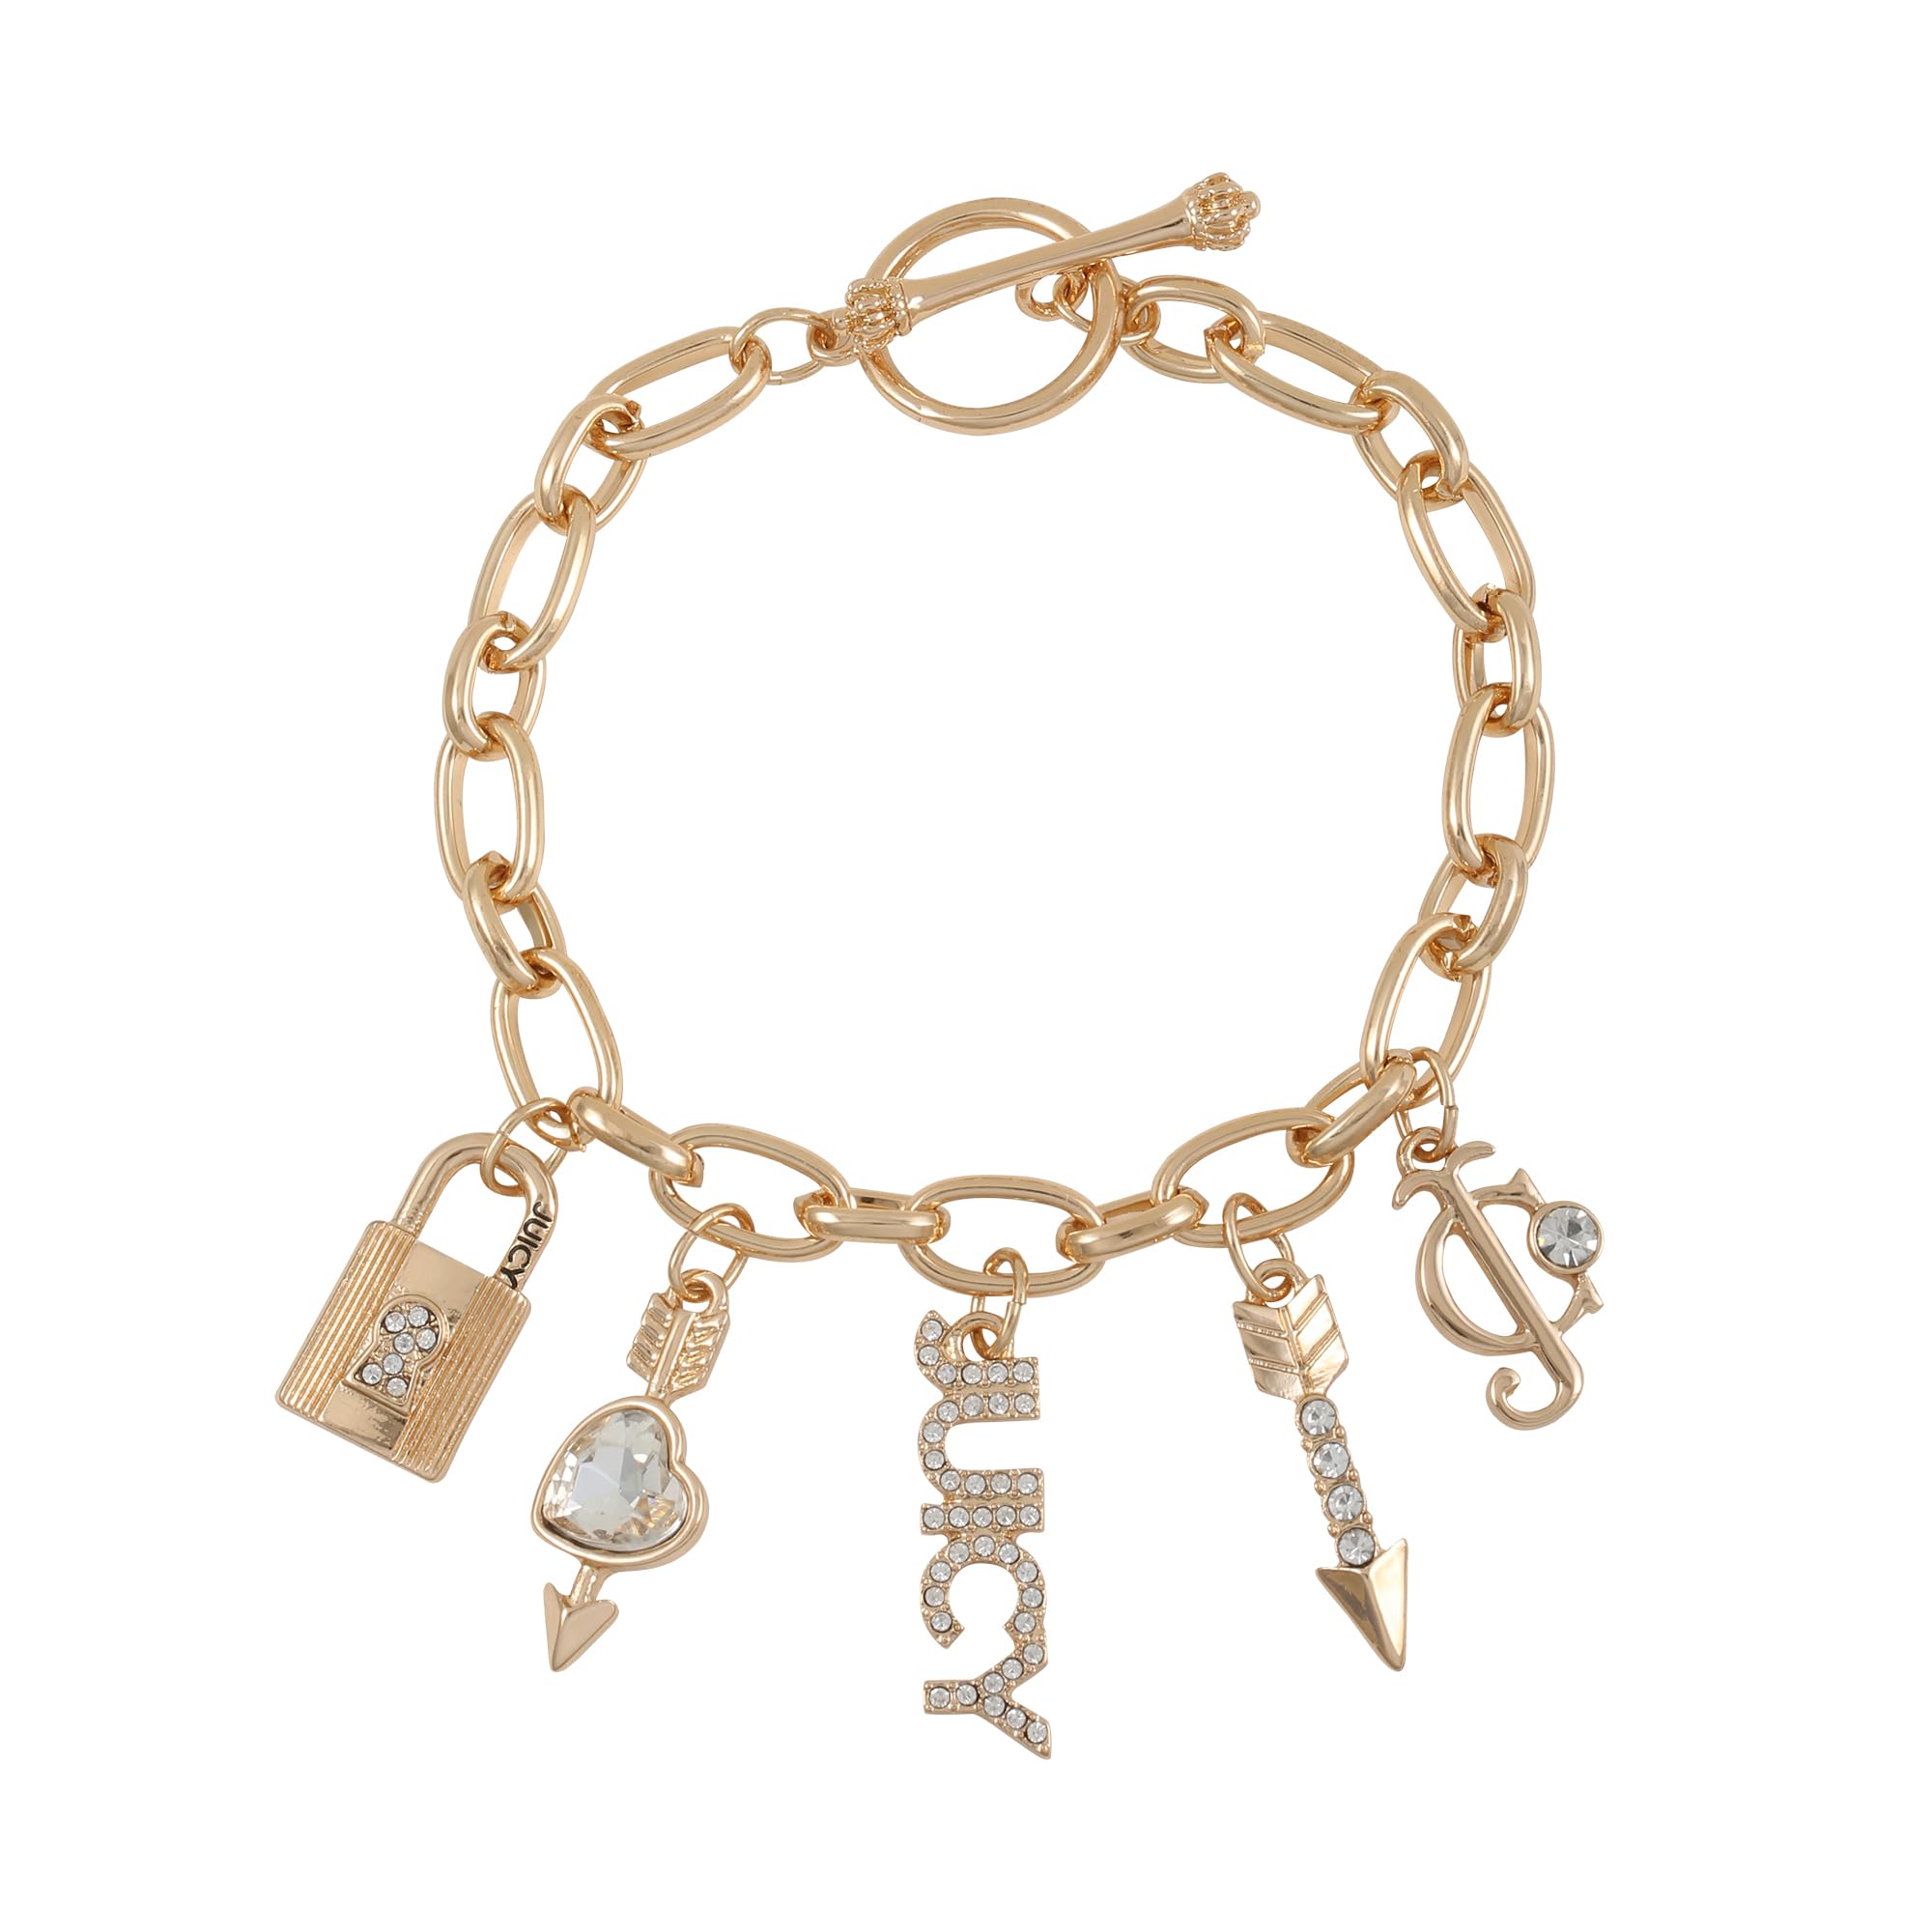 Juicy Couture Goldtone Toggle Charm Bracelet For Women